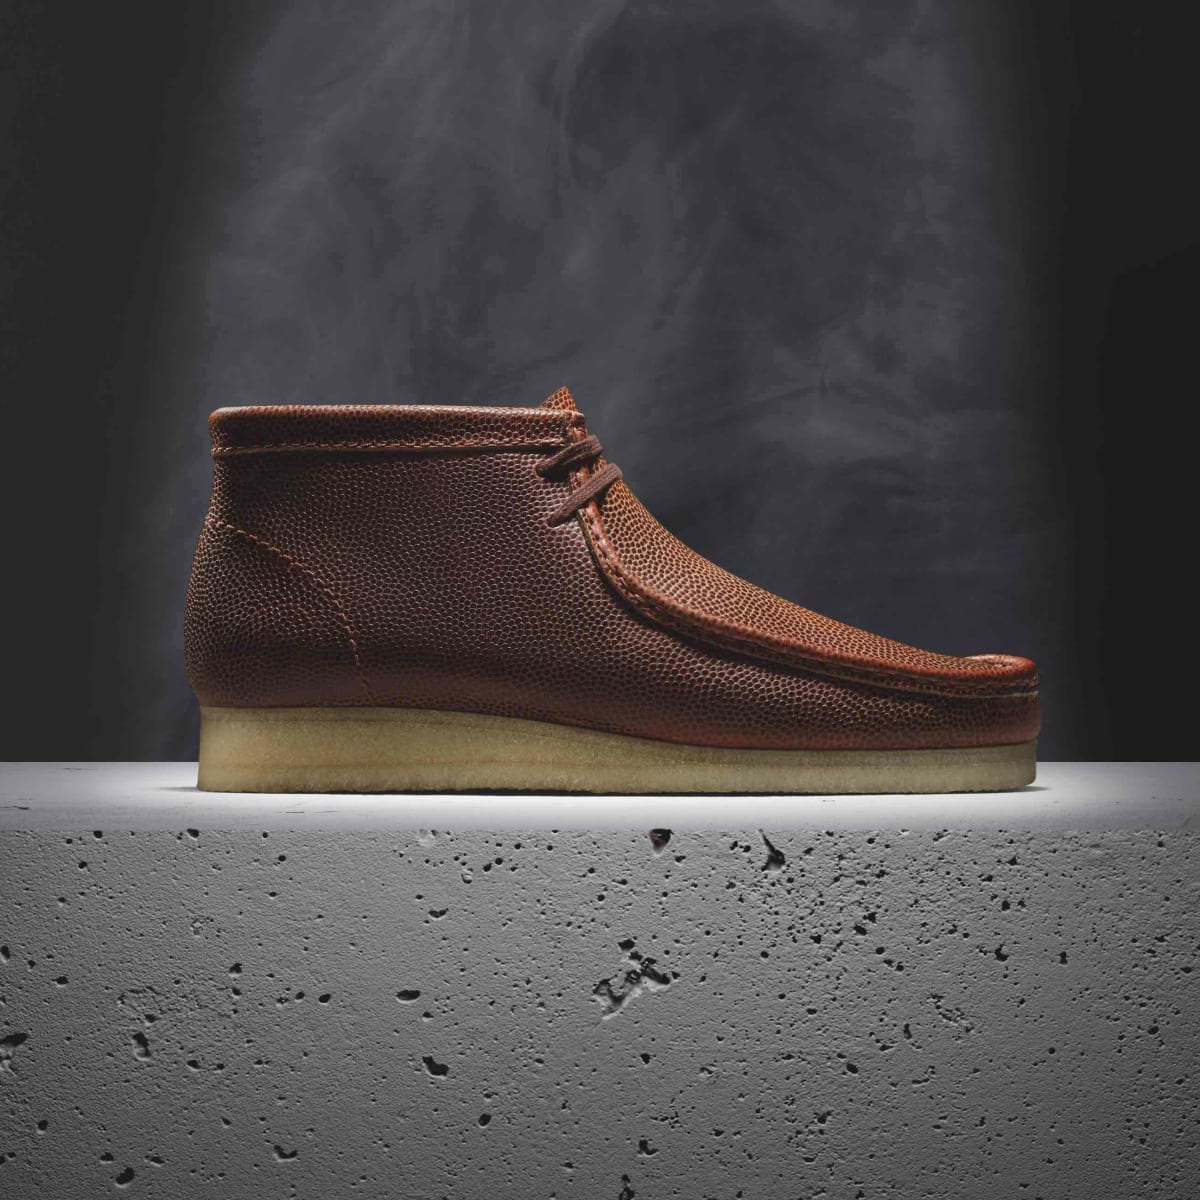 Coca caballo de fuerza Marchito Clarks and Horween team up on a dimpled leather Wallabee boot - Acquire